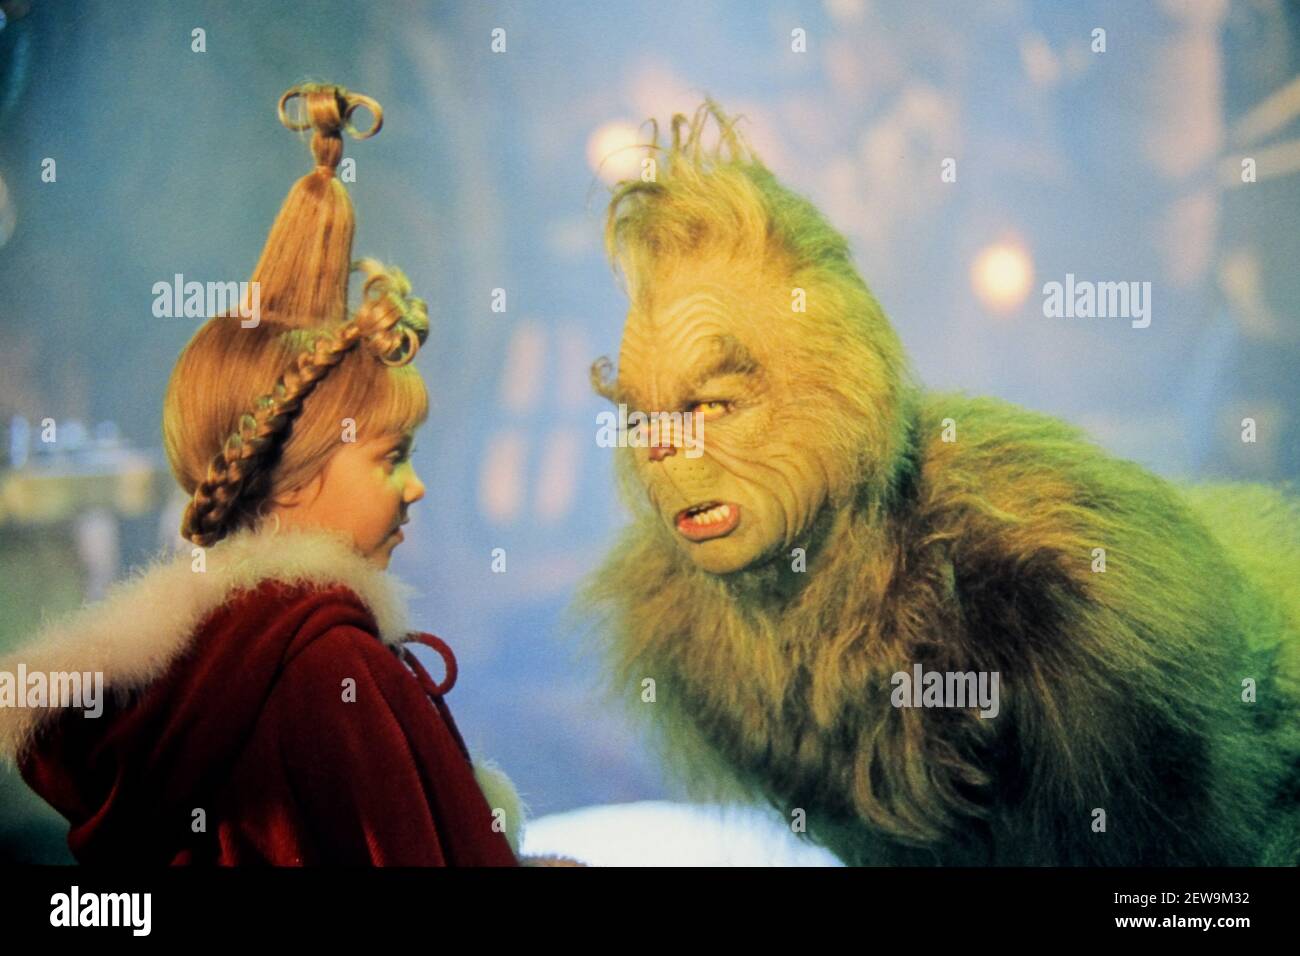 Jim Carrey, Taylor Momsen, 'D.r. Seuss 'come il Grinch Stole Natale' (2000) universale. Photo Credit: Ron Batzdorff/ Universal /The Hollywood Archive - file Reference N. 34082-661THA Foto Stock